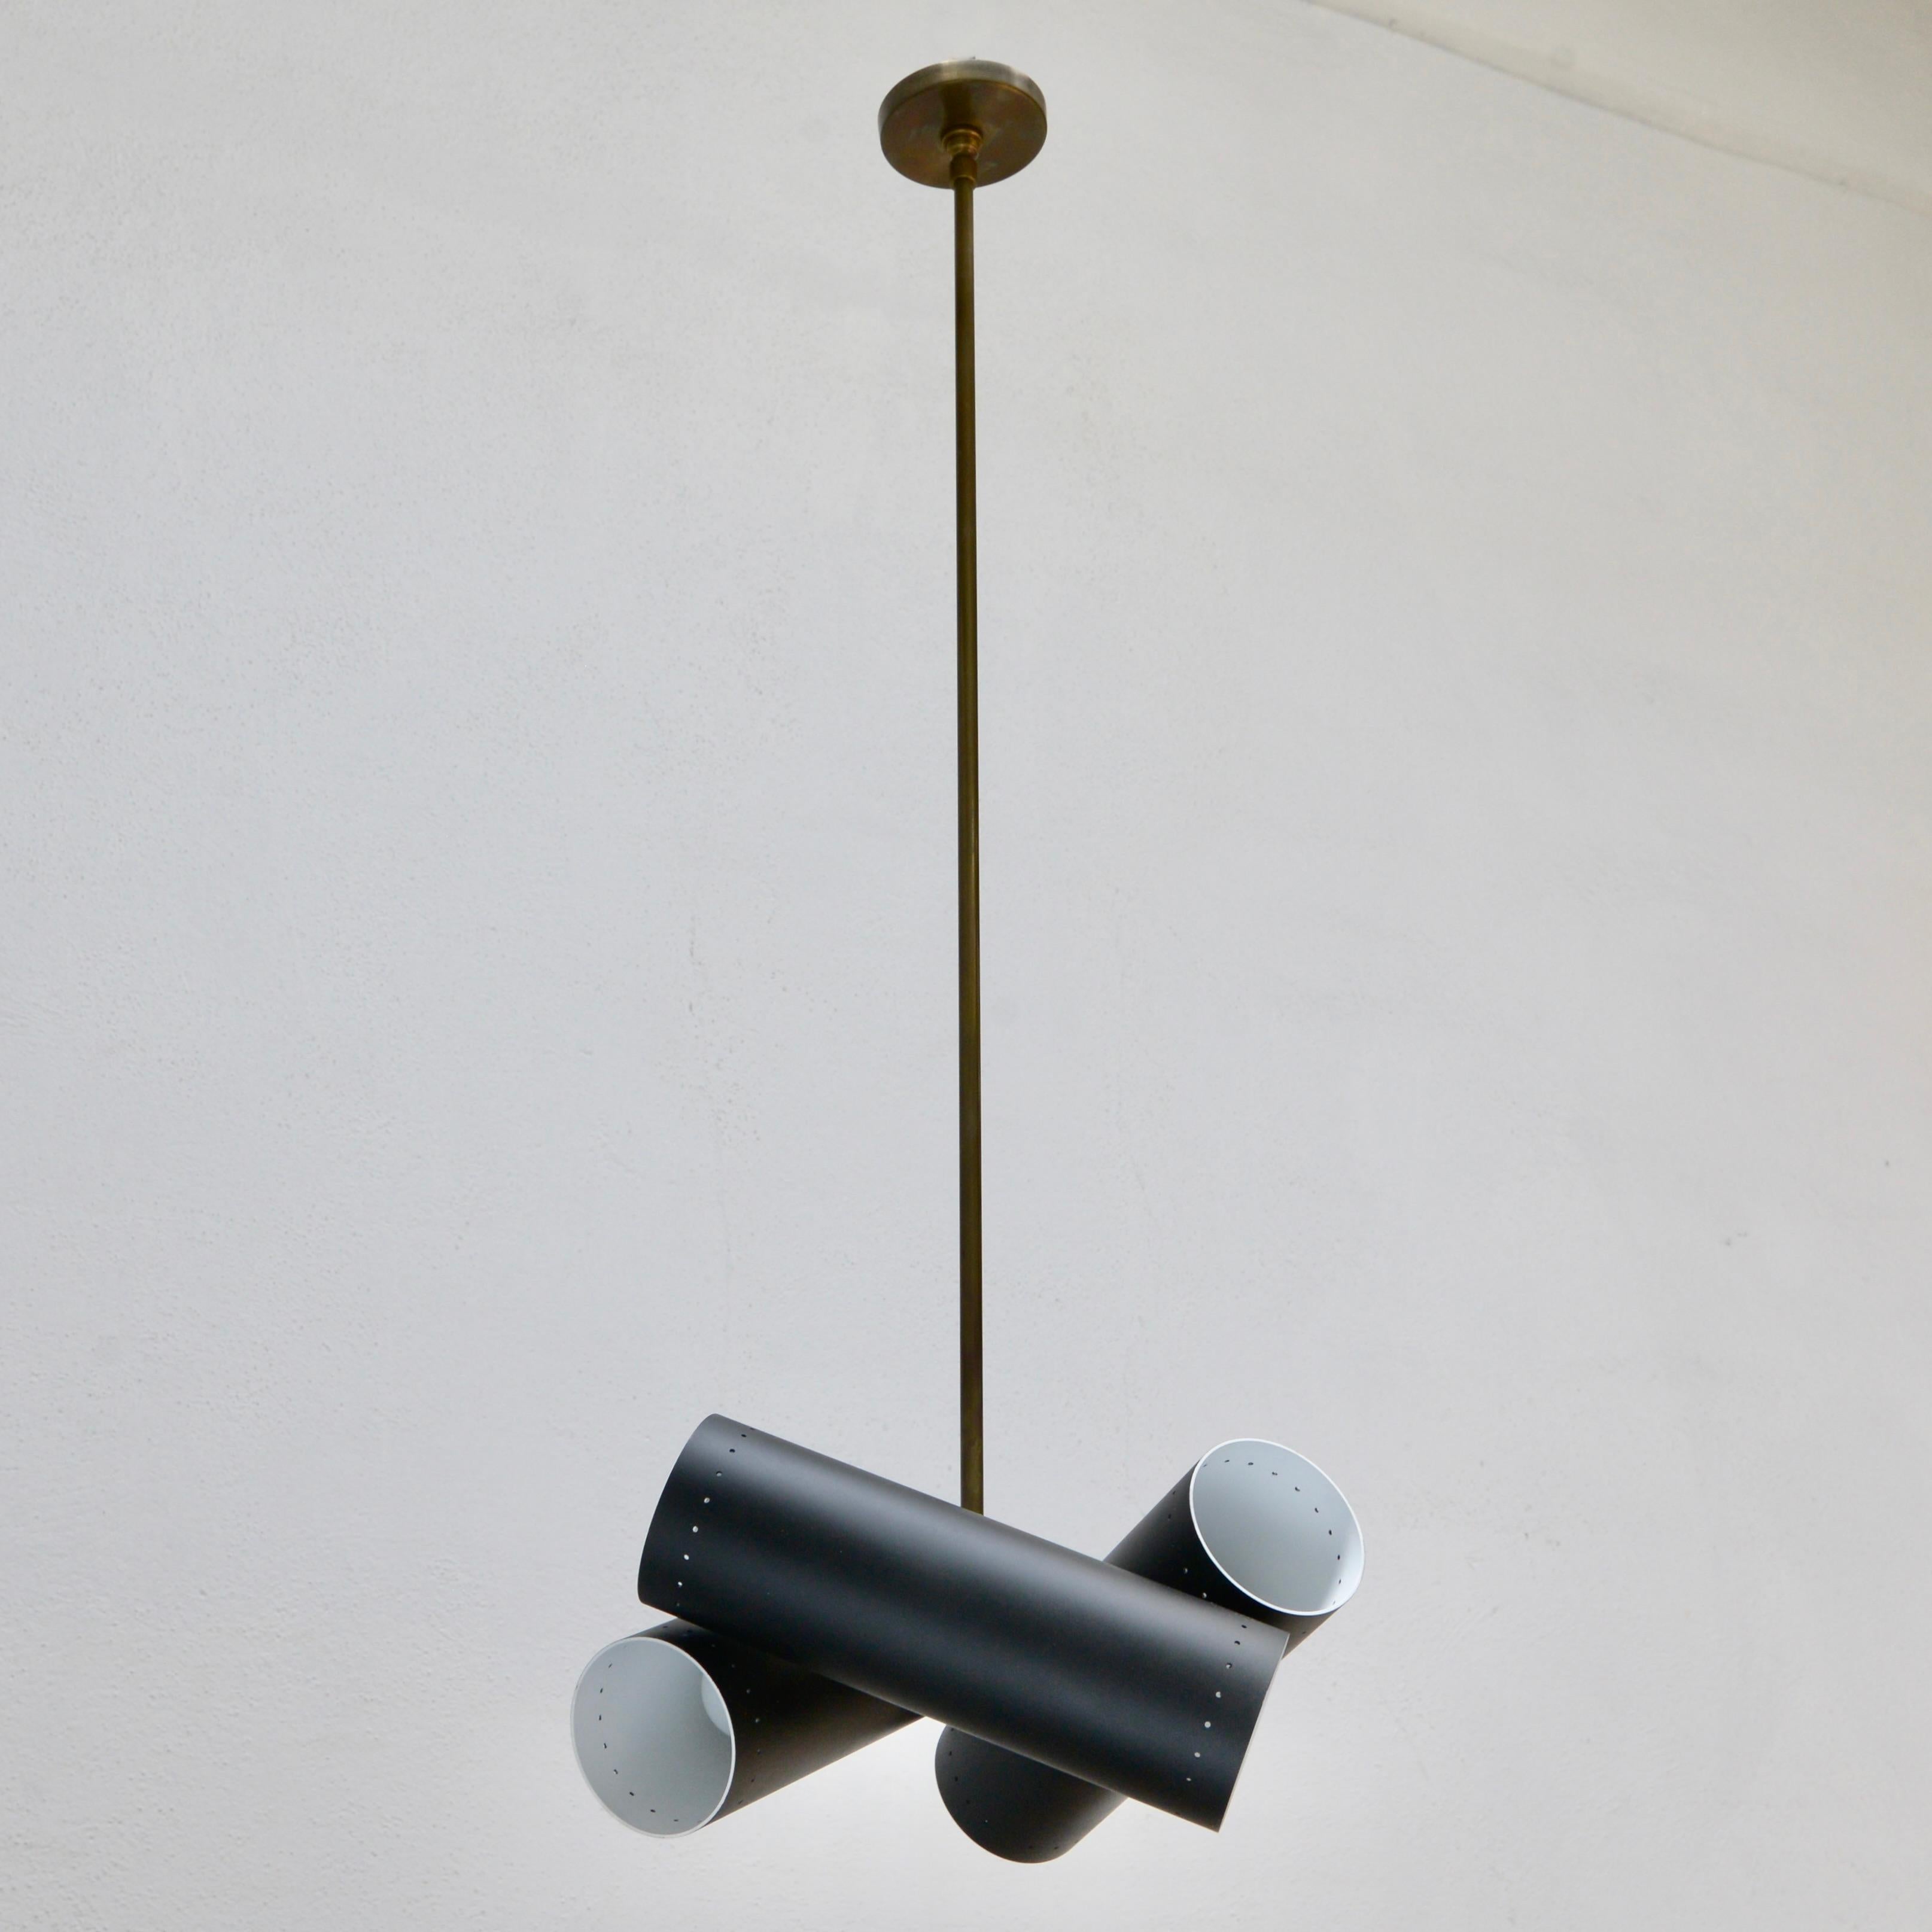 Modern, geometric LUbular Pendant SM is a smaller version of our LUbular Pendant. The fixture has three cylindrical tubular shades criss crossing to create directional light.  Made to order. Brass and painted aluminum finish. Custom finish and OAD